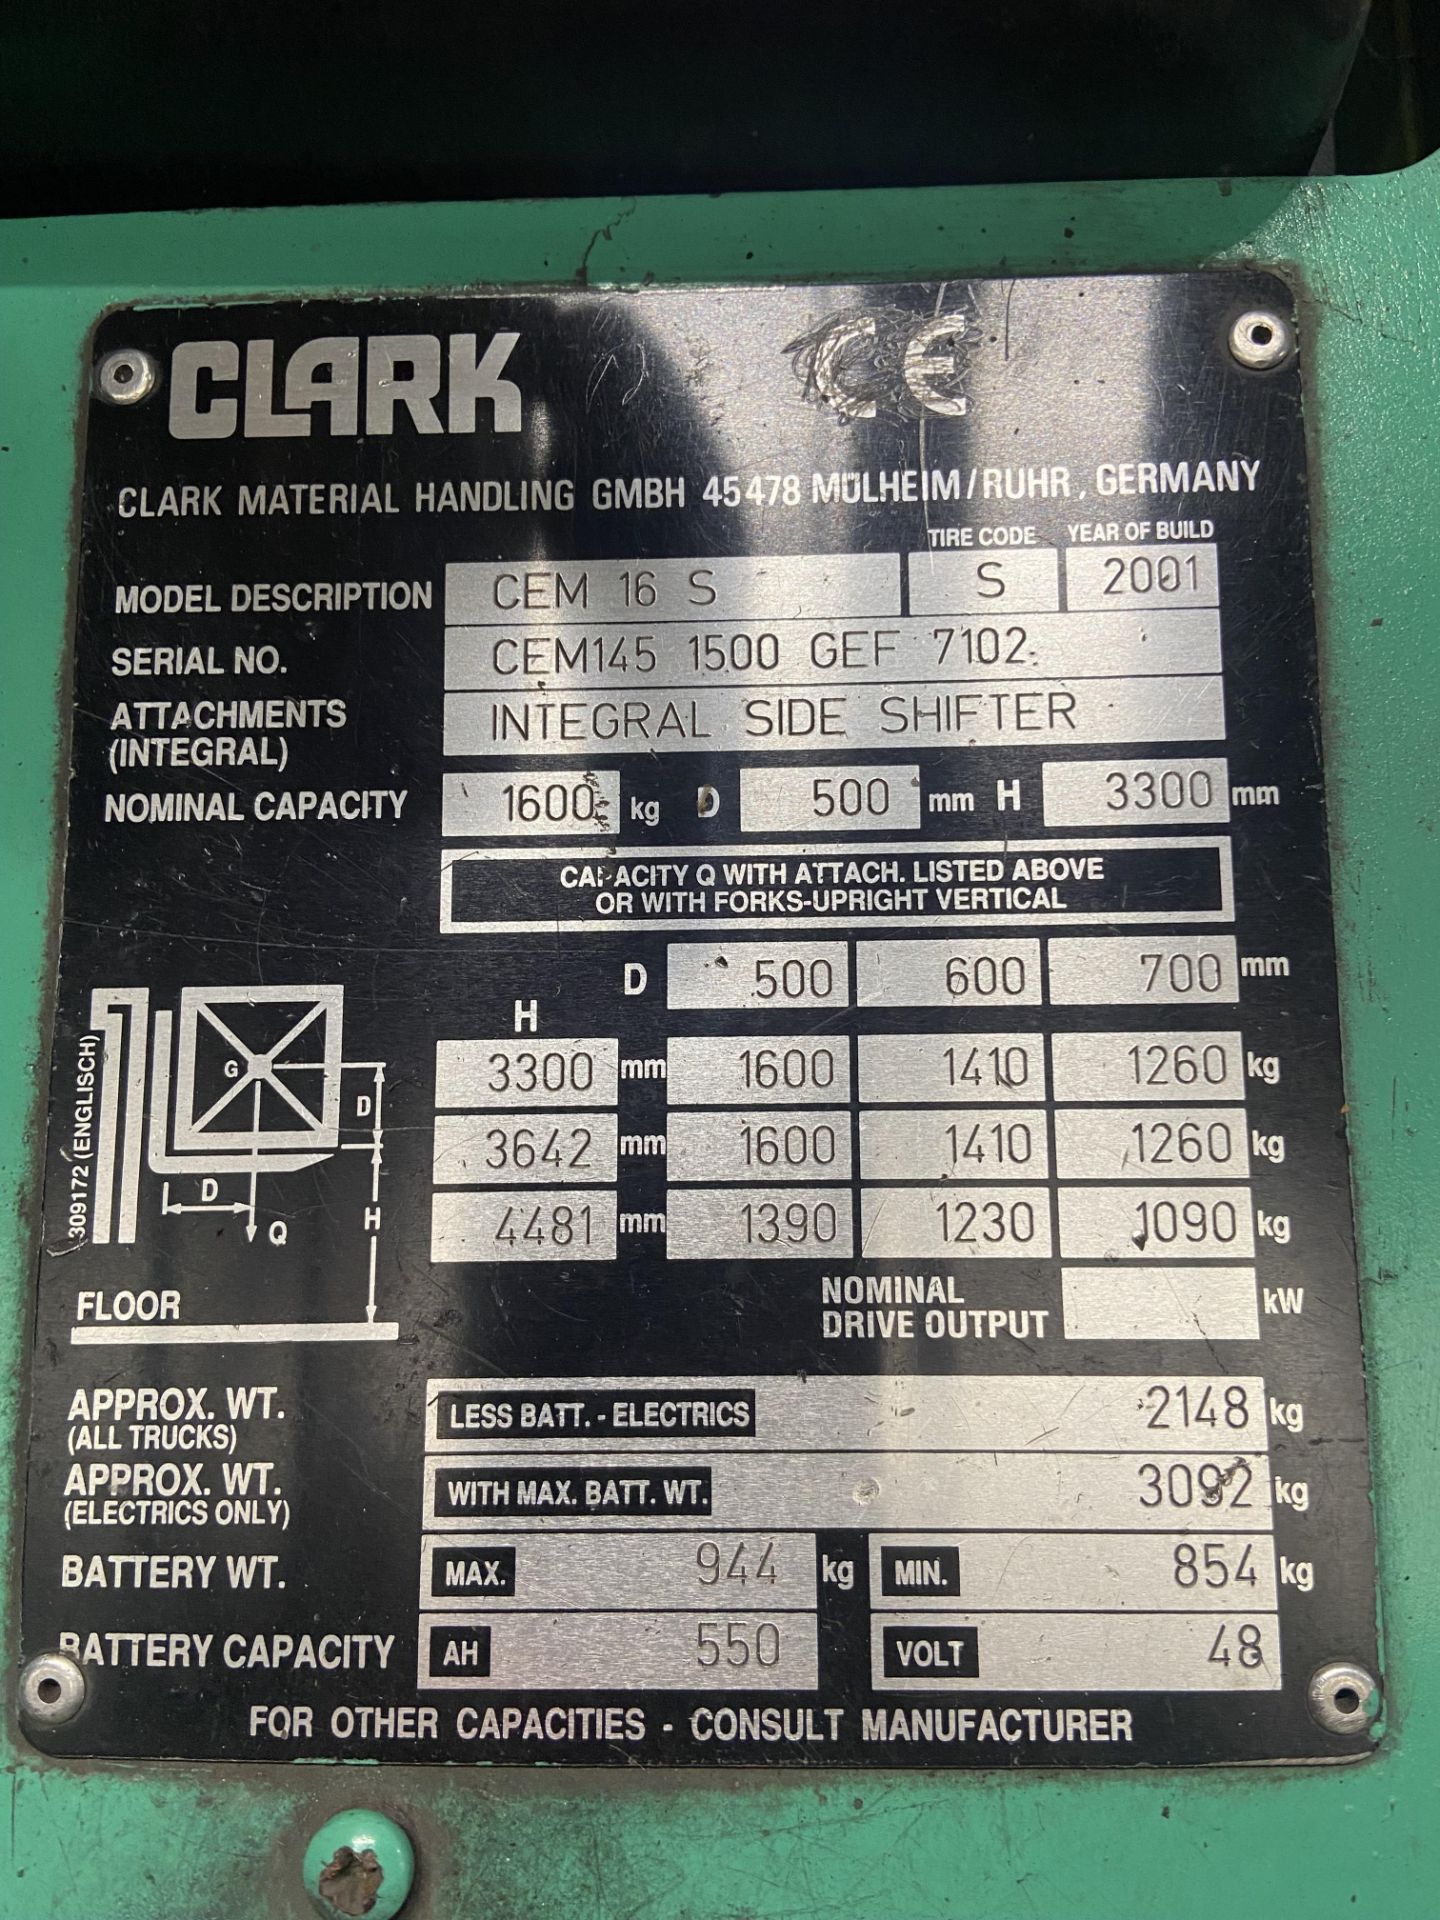 Clarke CEM 16 S 1600kg cap. Electric Fork Lift Truck, serial no. CEM145 1500 GEF 7102, year of - Image 7 of 9